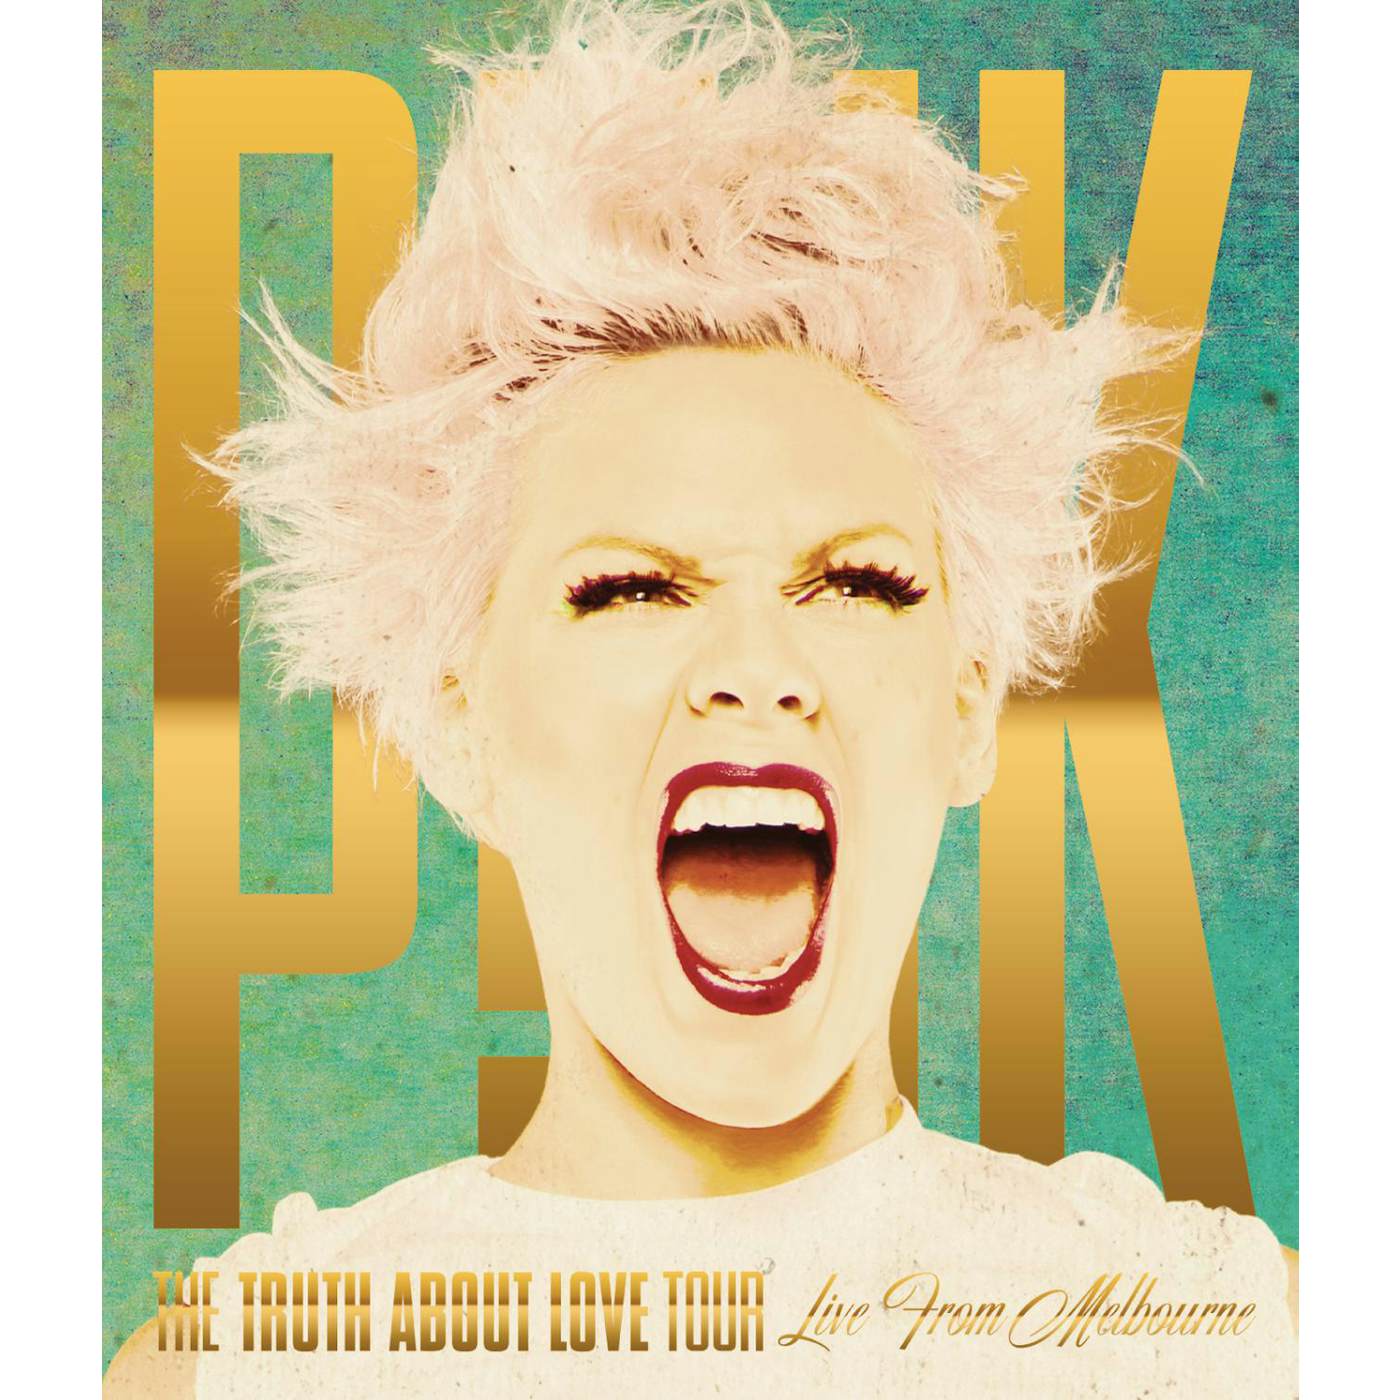 P!nk TRUTH ABOUT LOVE TOUR: LIVE FROM MELBOURNE DVD